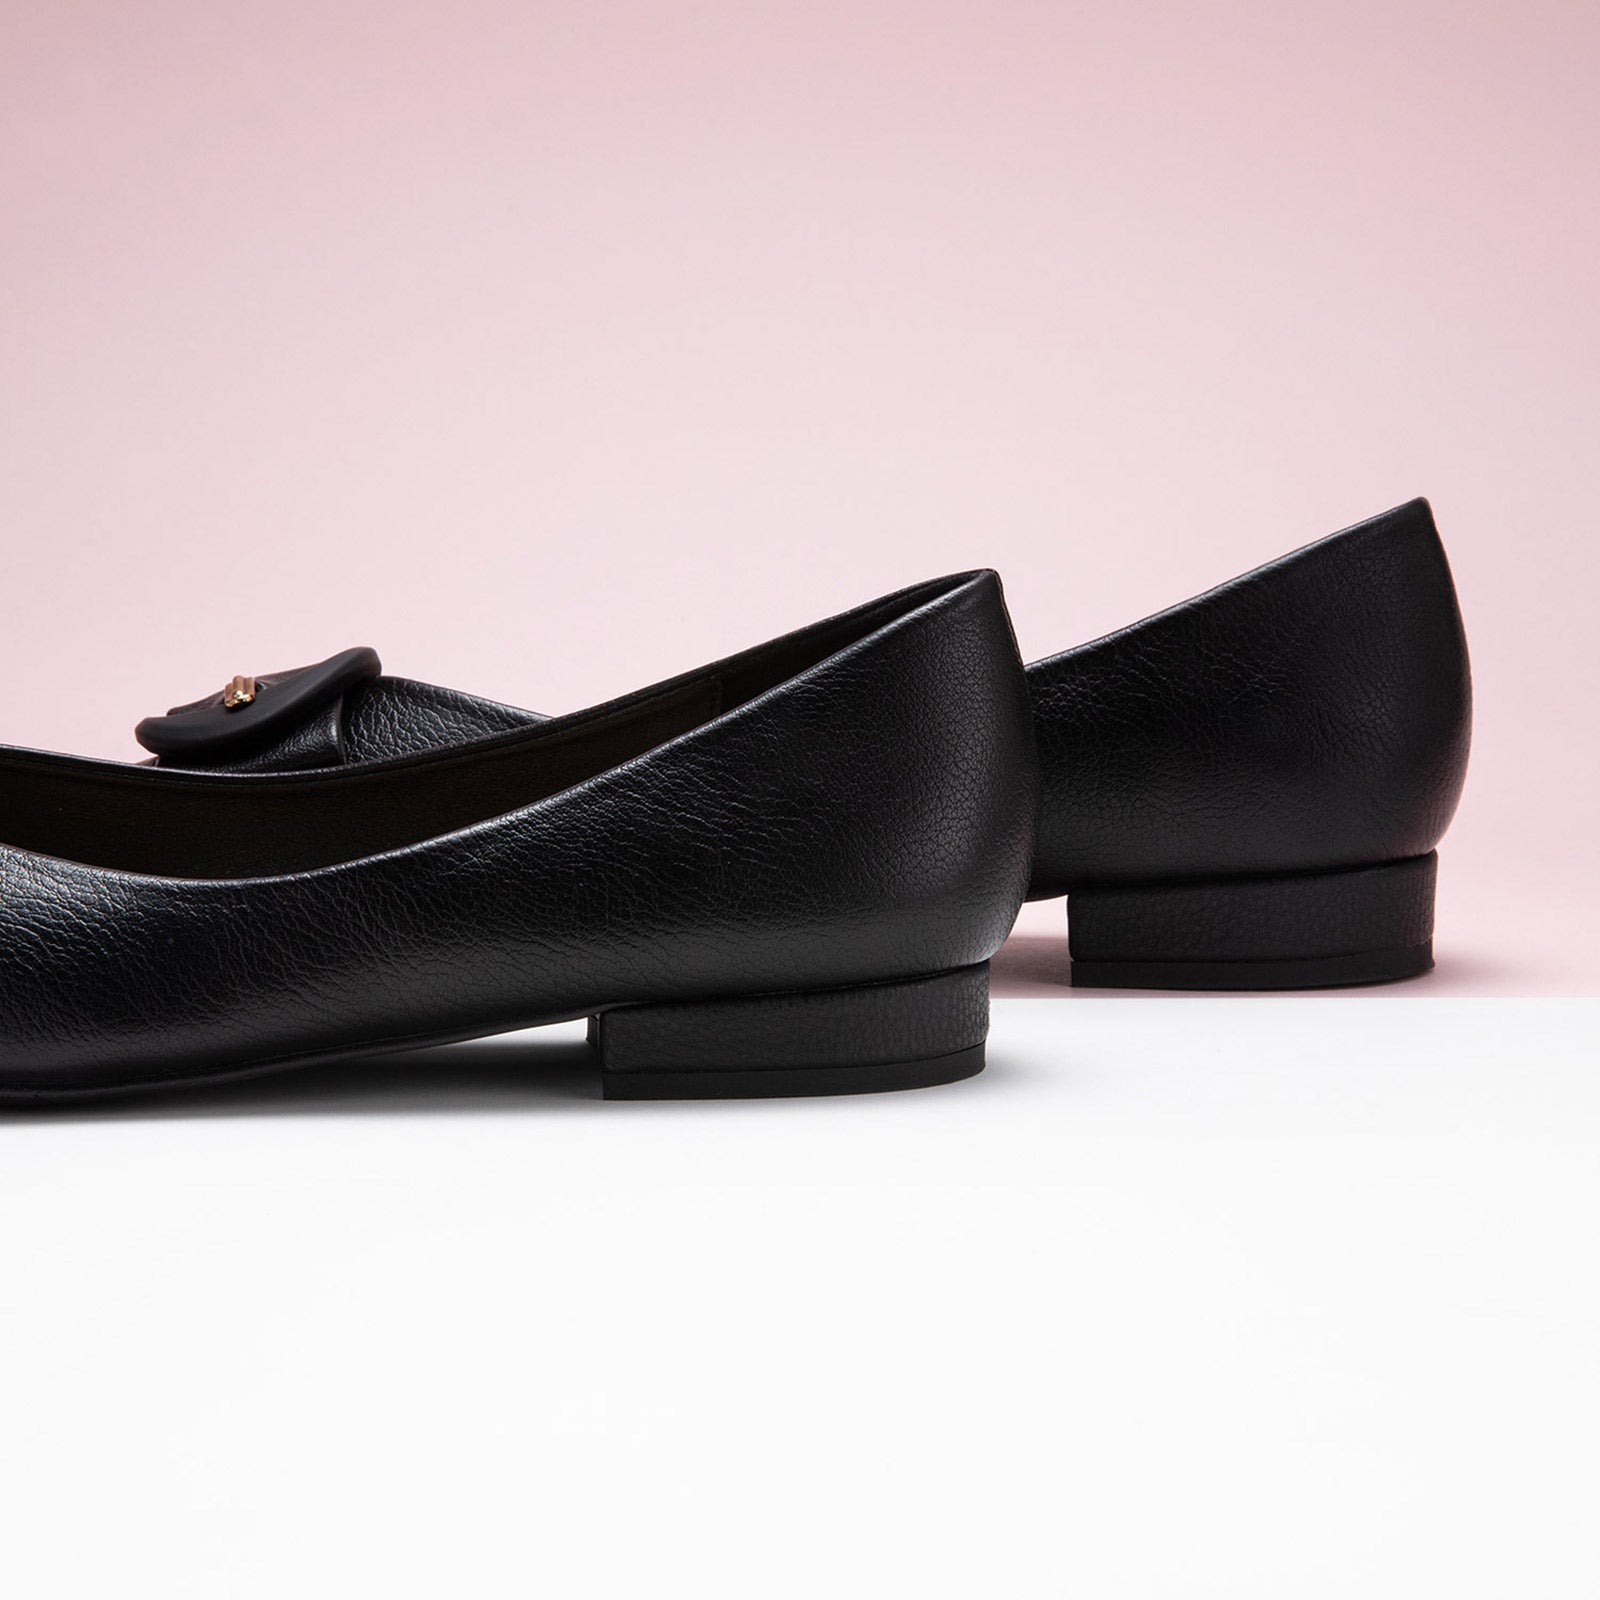 Black Grain Leather Flats with a pointed toe, providing a chic and polished look.